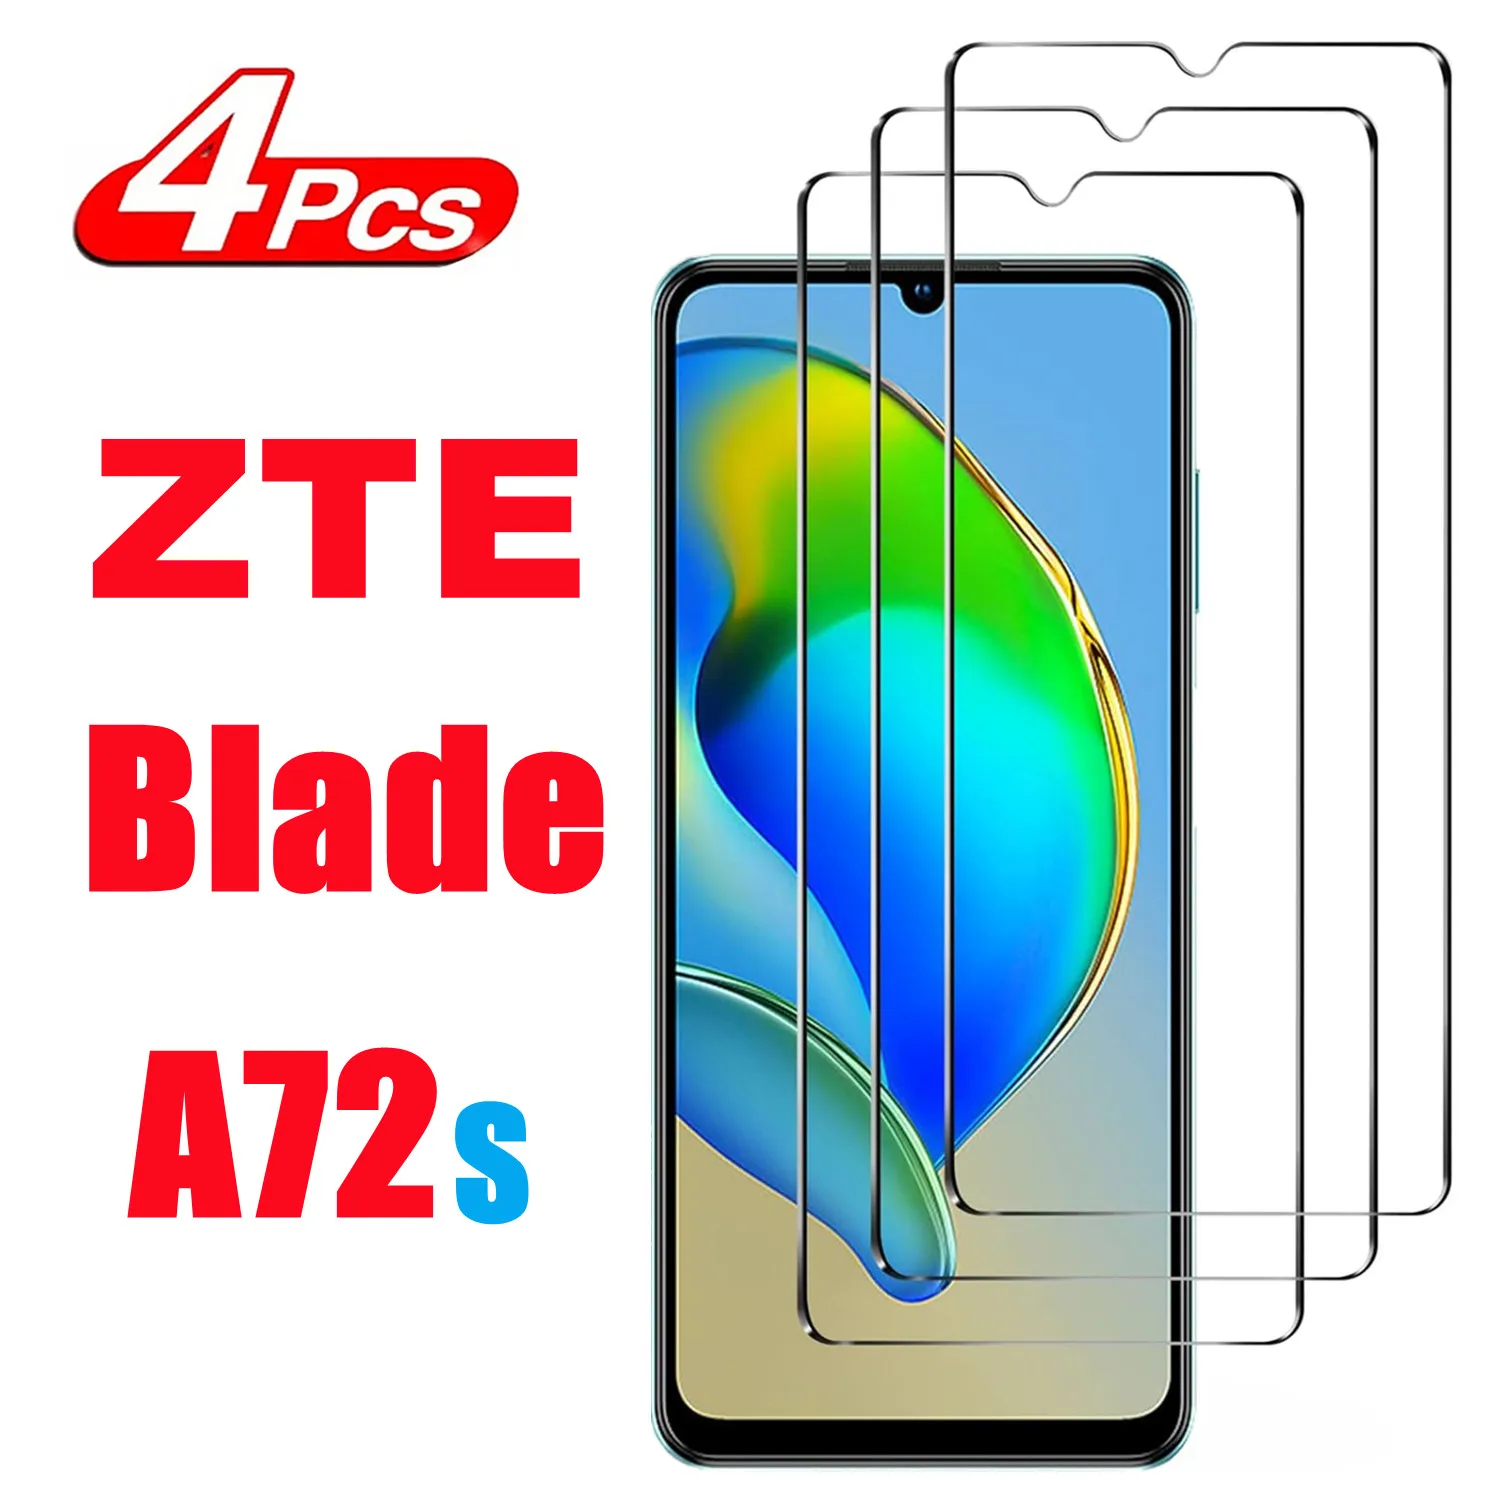 2/4 Pcs For ZTE Blade A72s 9H Tempered Glass For ZTE Blade A72s Screen Protector Glass Film 2 5d for zte blade a51 glass tempered cover tempered glass film for zte blade a 51 protection screen protector protective film